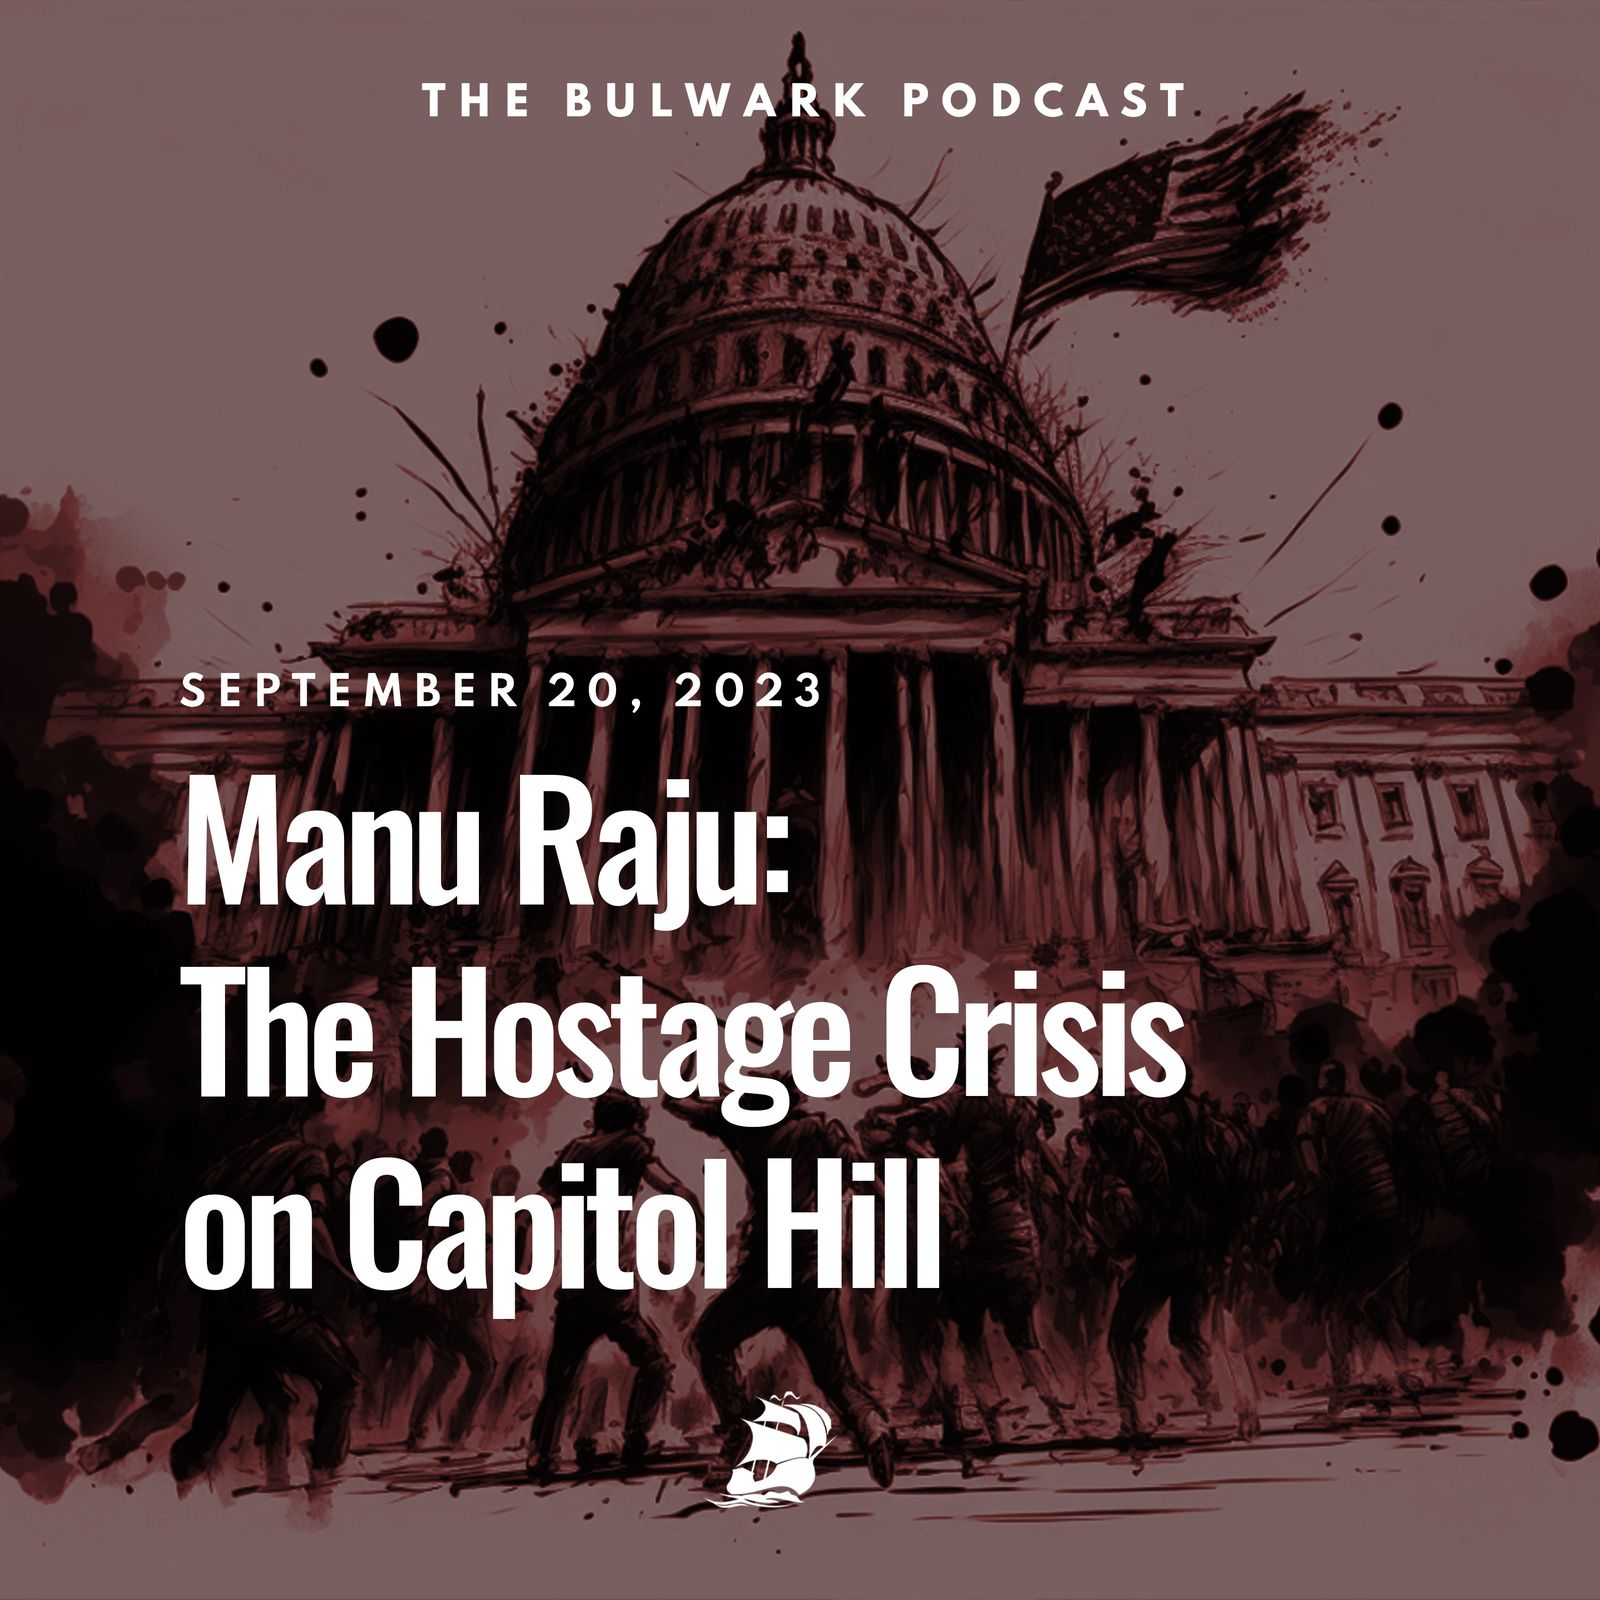 Manu Raju: The Hostage Crisis on Capitol Hill by The Bulwark Podcast